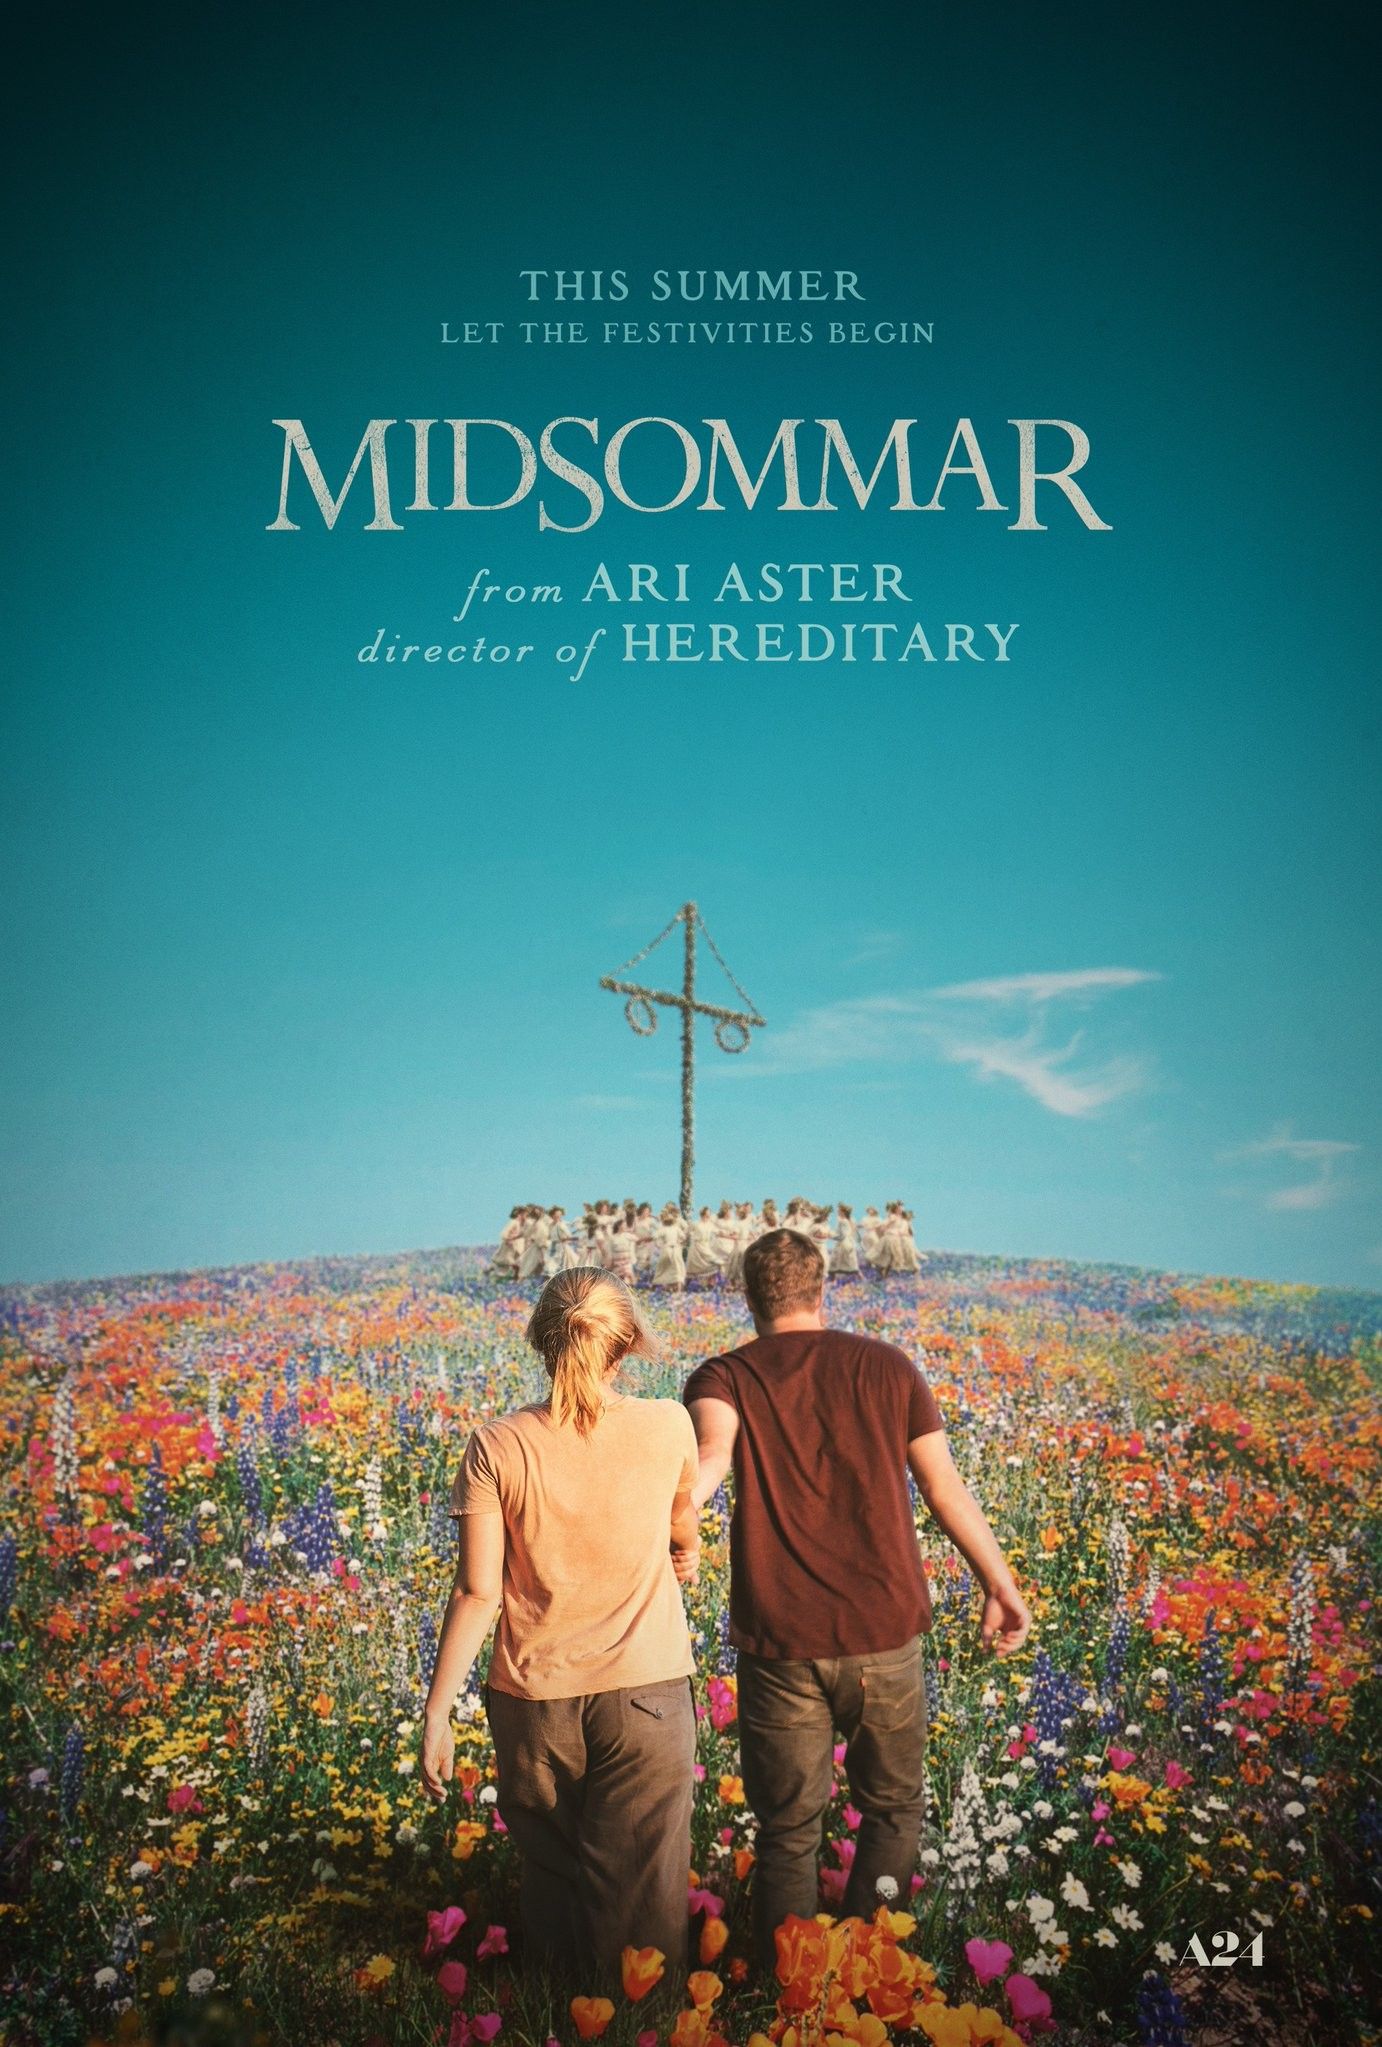 Midsommar Trailer: The New Nightmare From the Director of Hereditary